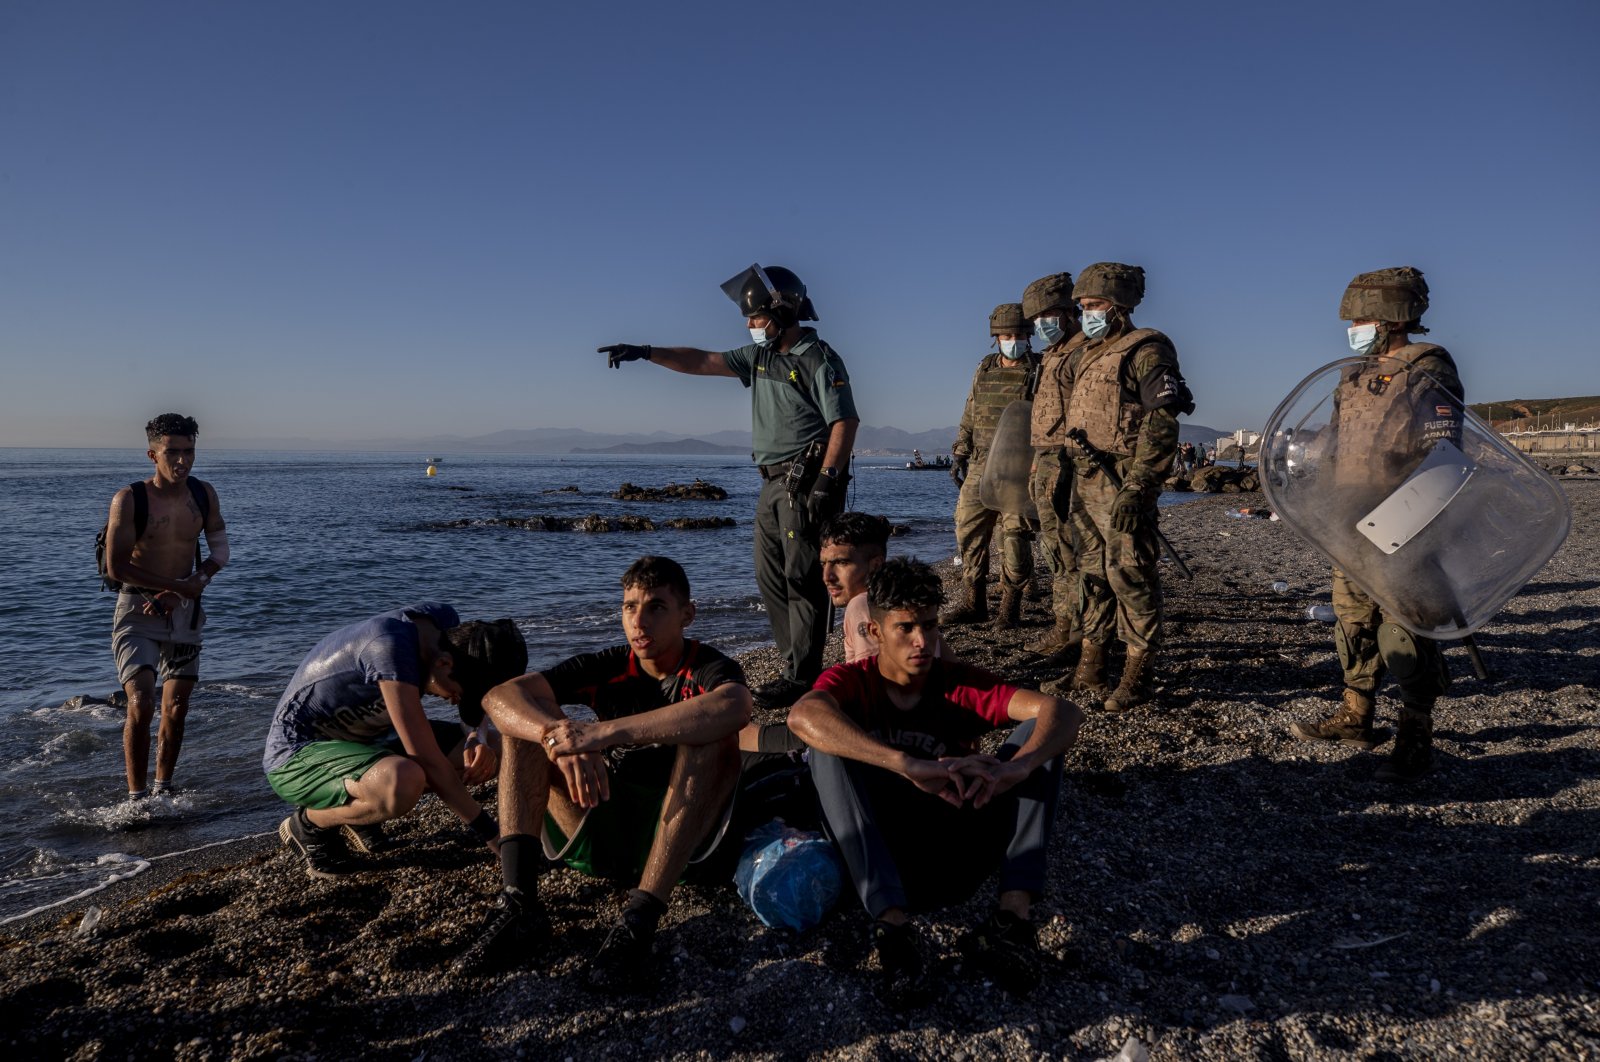 Migrants are surrounded by Spanish security forces on a beach after arriving at the Spanish enclave of Ceuta, near the border of Morocco and Spain, May 19, 2021. (AP Photo)